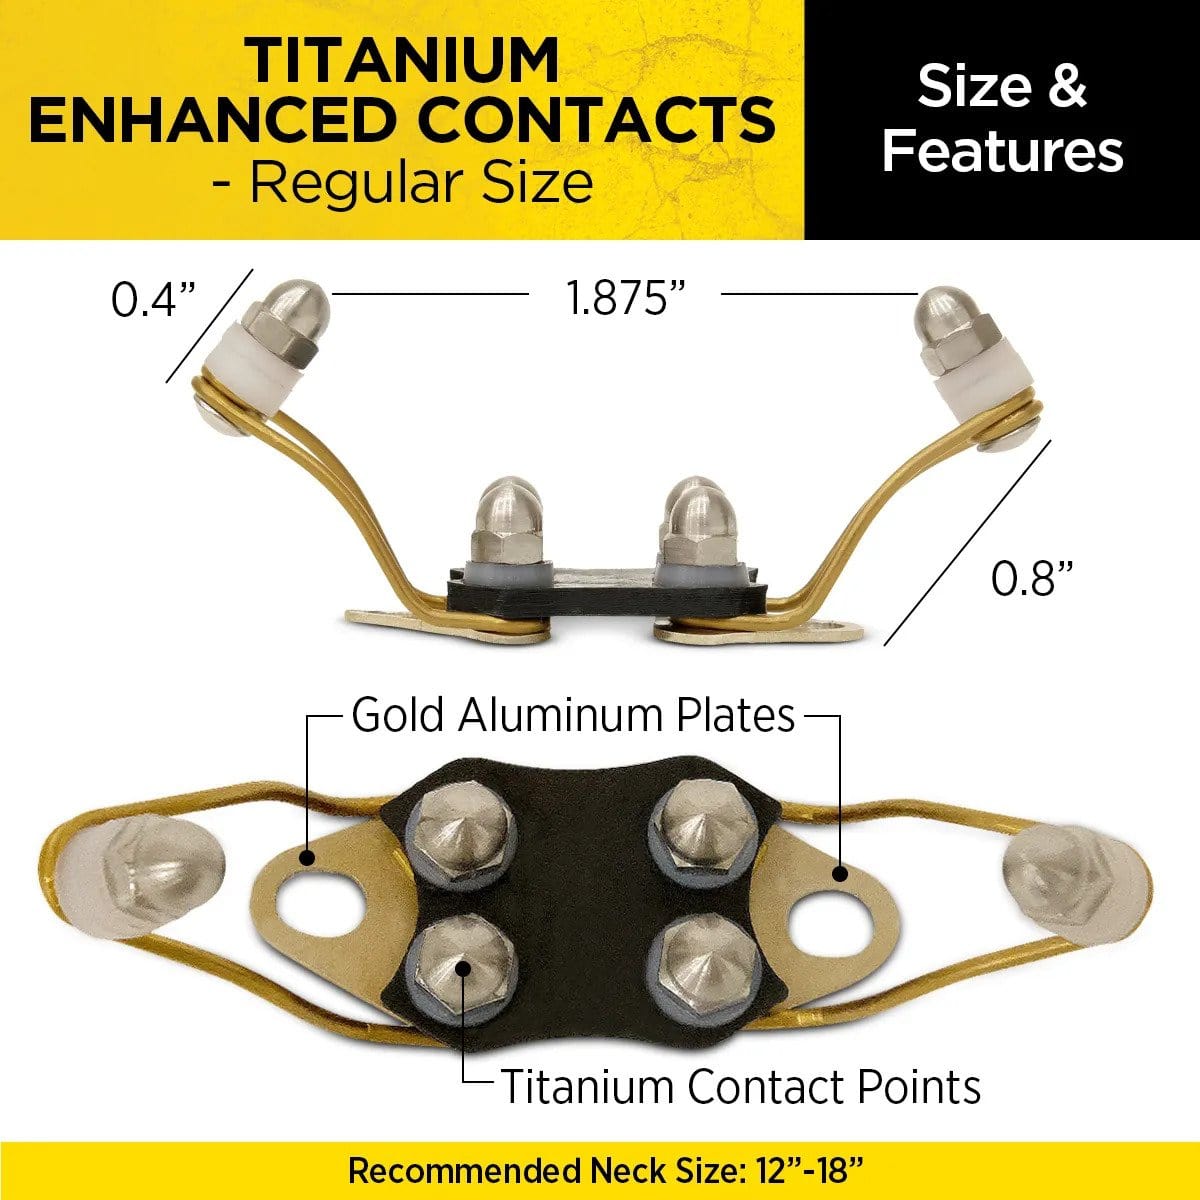 Dogtra Titanium Enhanced Contact Point Size and Features